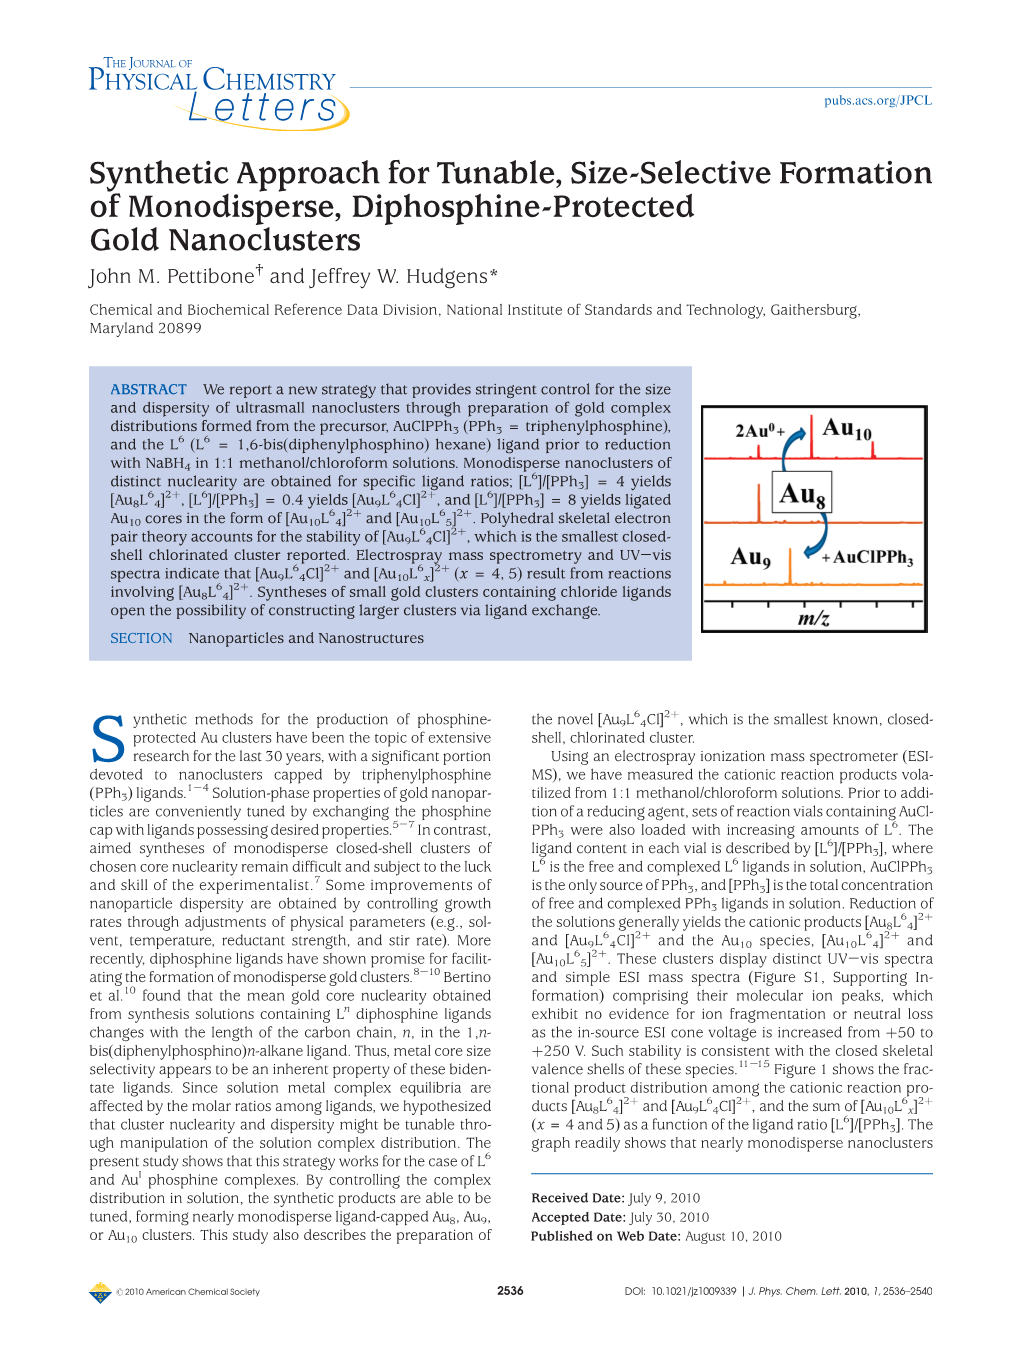 Synthetic Approach for Tunable, Size-Selective Formation of Monodisperse, Diphosphine-Protected Gold Nanoclusters † John M